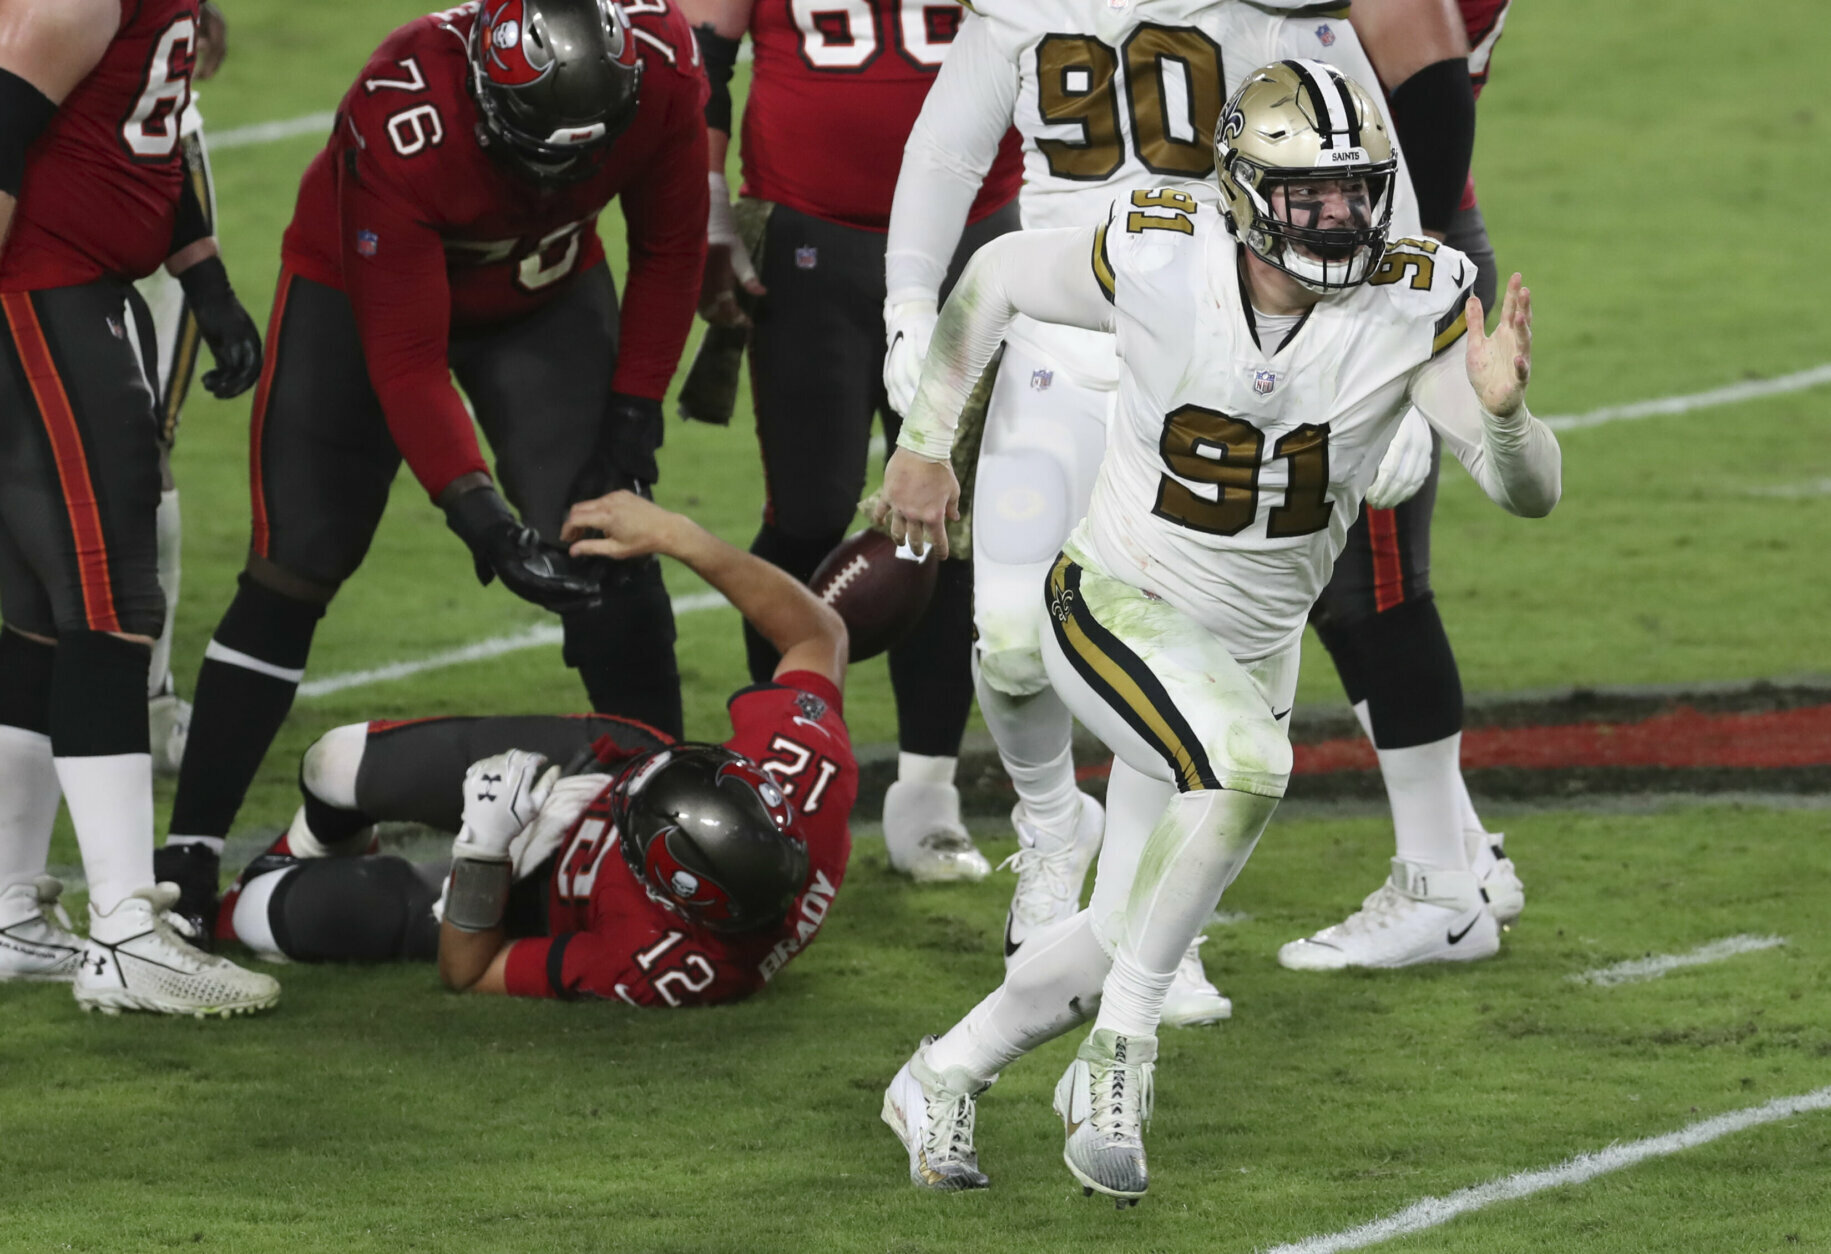 <p><em><strong>Saints 38</strong></em><br />
<em><strong>Bucs 3</strong></em></p>
<p>I certainly didn&#8217;t see this coming. Drew Brees snatching the all-time passing touchdown record back from Tom Brady in his own house was the nicest thing that happened — Brady&#8217;s new toy (Antonio Brown) was a non-factor in his Bucs debut, the GOAT was battered and beaten en route to the worst loss of his career and the first time in his career he was swept at the hands of a division opponent. This ain&#8217;t the AFC East, Tommy. Don&#8217;t be surprised if Carolina reminds him of that next week, too.</p>
